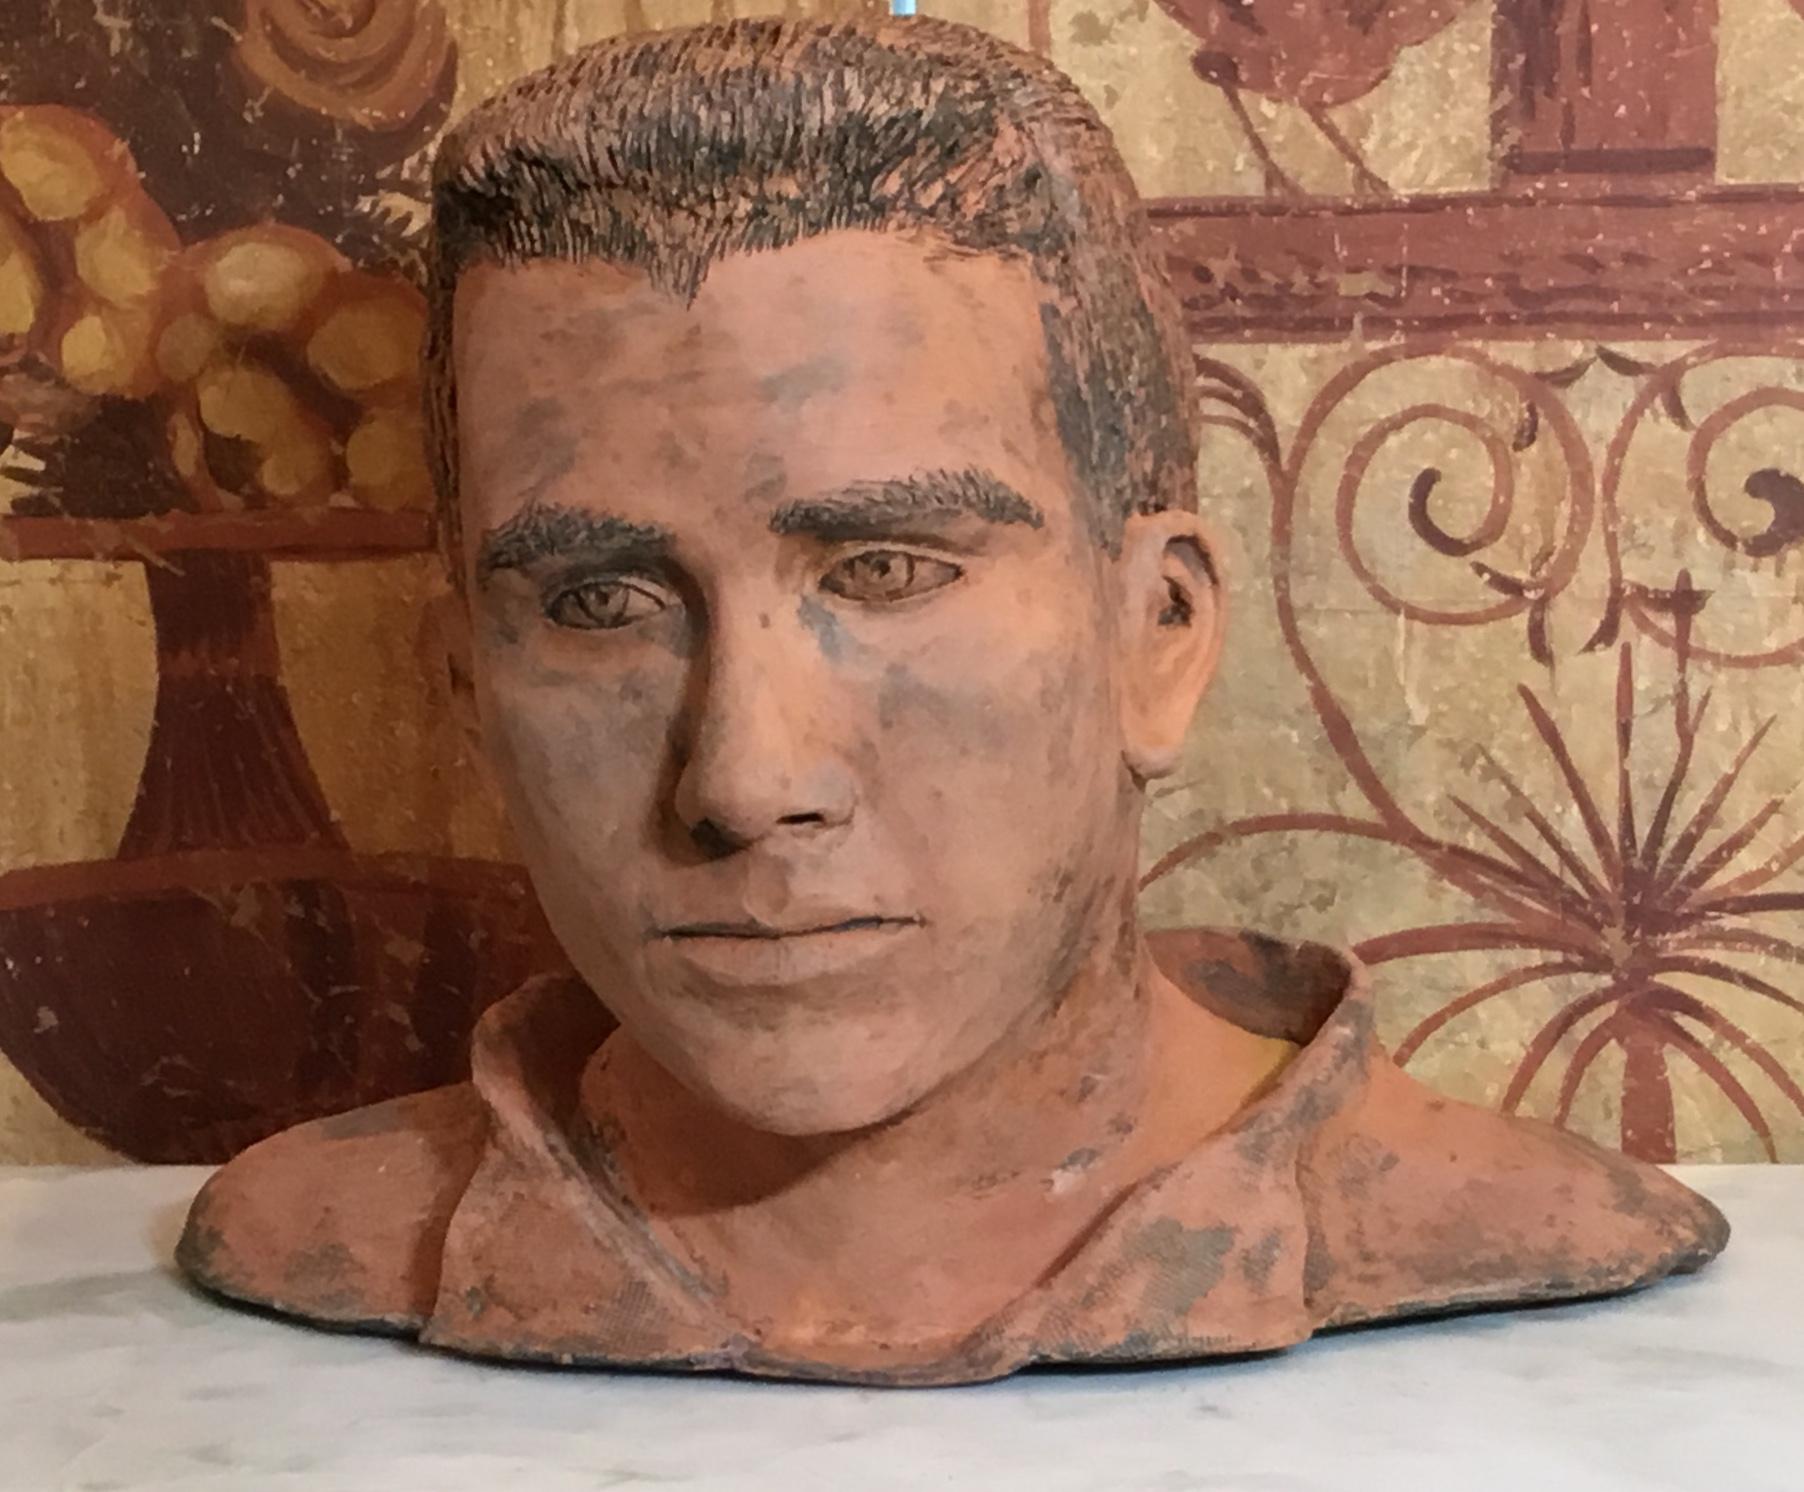 Intriguing bust of a young man made of rustic unglazed ceramic great eyes expression, looking forward, beautiful object of art from any angle .signed and dated MD 6/91.
If anybody know anything about who is the artist please let me know.

   